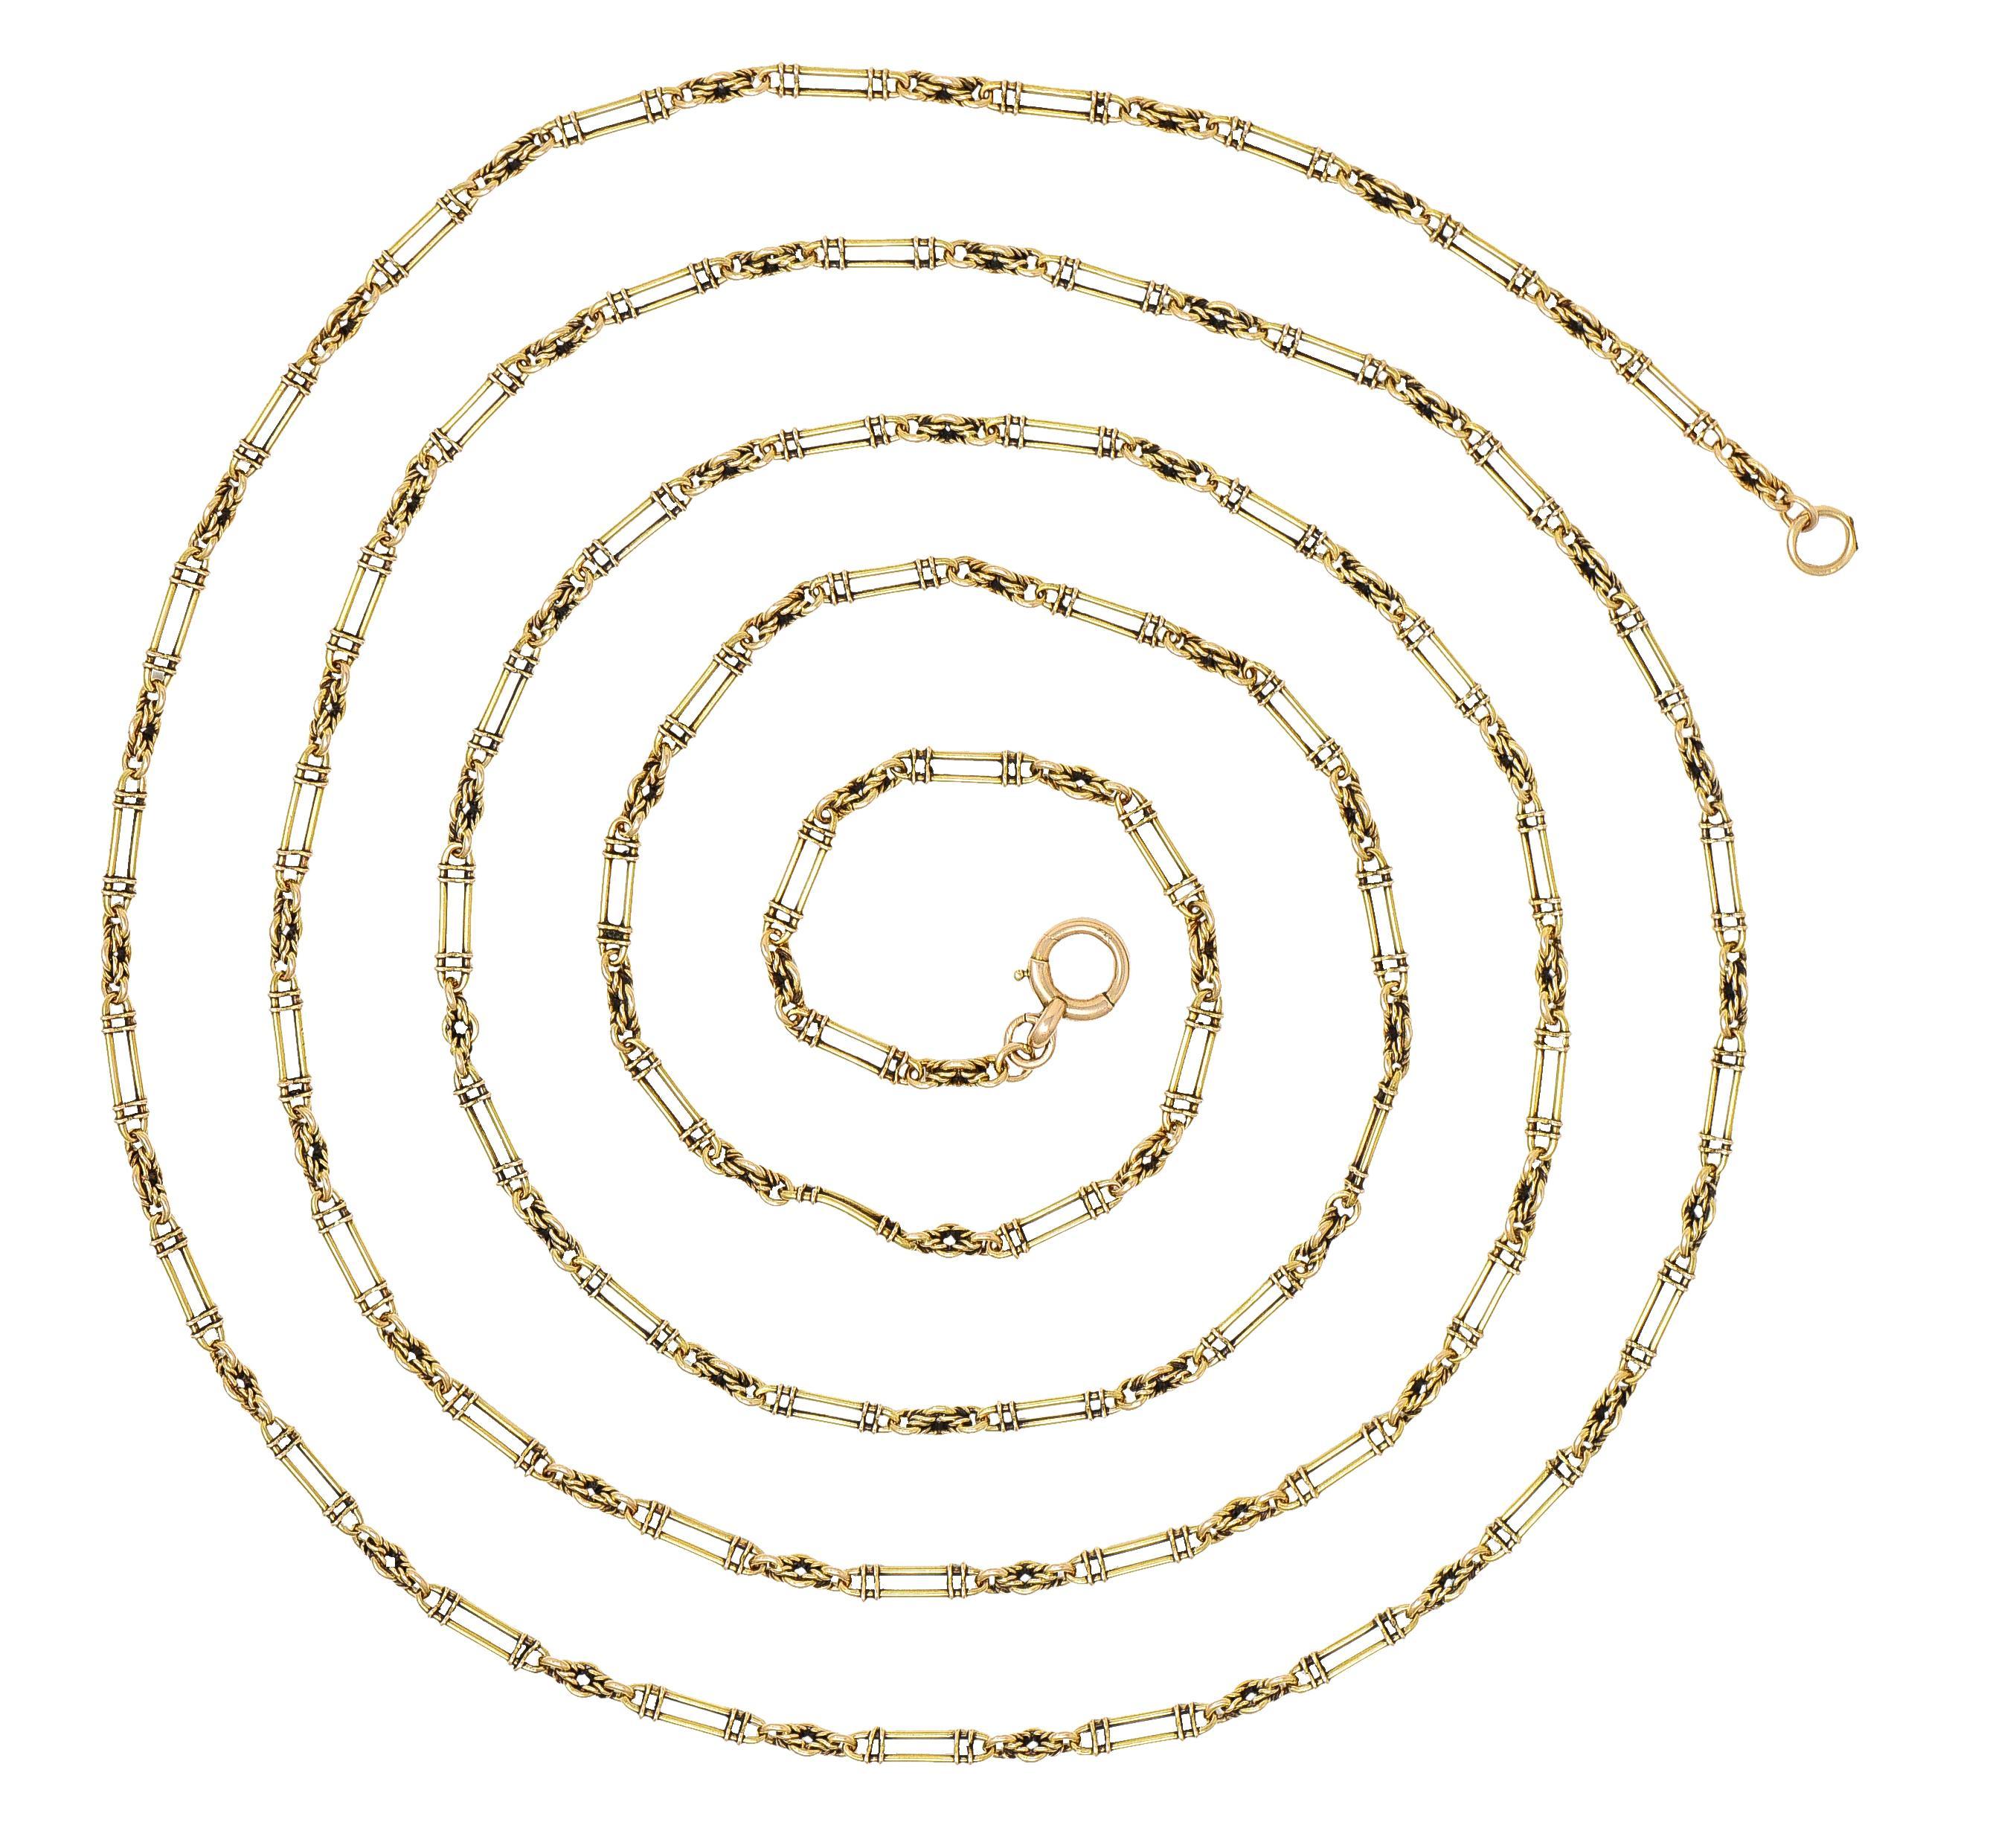 Comprised of elongated oval wire links accented by wrapped segments
Alternating with stylized wire-wrapped cable link chain
Completed by large spring clasp closure
Stamped for 15 karat gold 
With partial maker's mark 
Circa: 1860's
Width at widest: